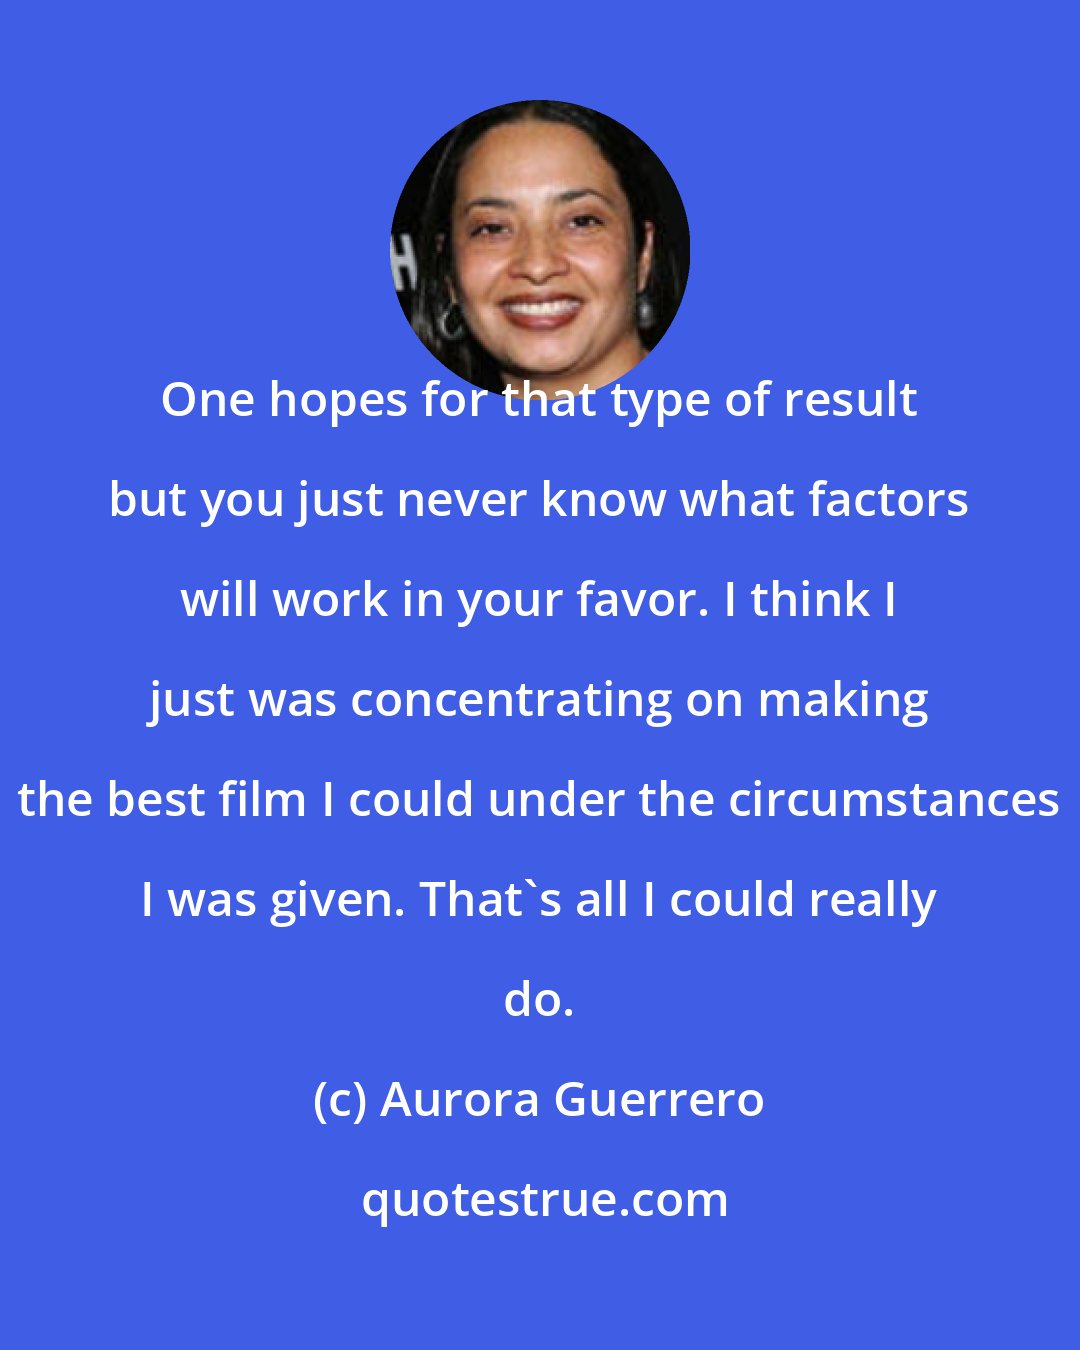 Aurora Guerrero: One hopes for that type of result but you just never know what factors will work in your favor. I think I just was concentrating on making the best film I could under the circumstances I was given. That's all I could really do.